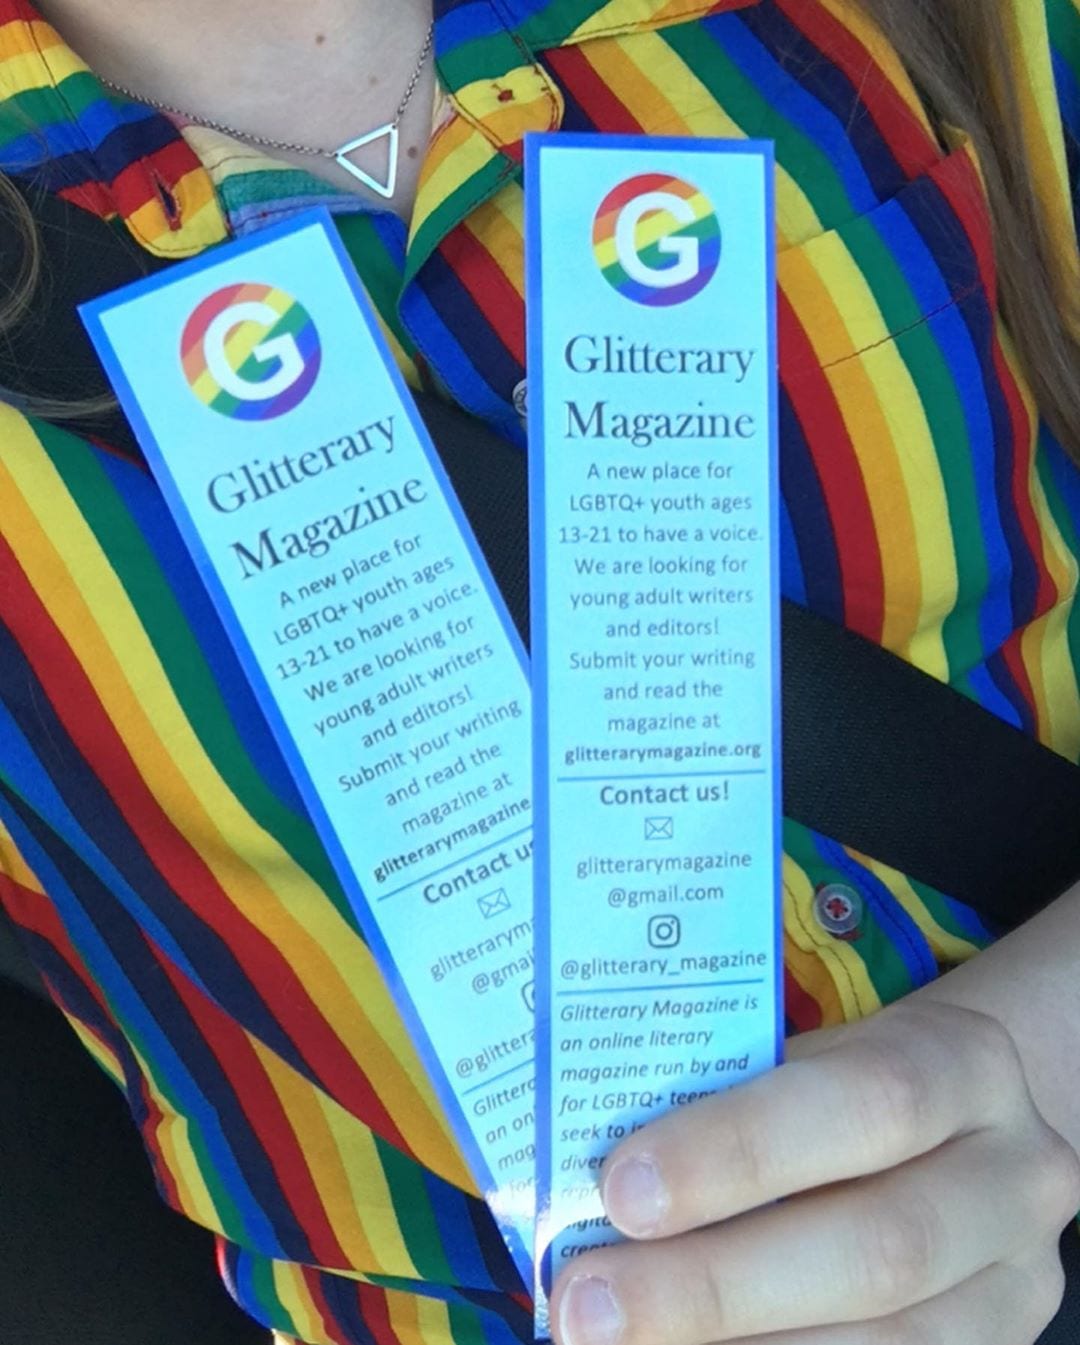 Bookmarks with Glittery Magazine info on it